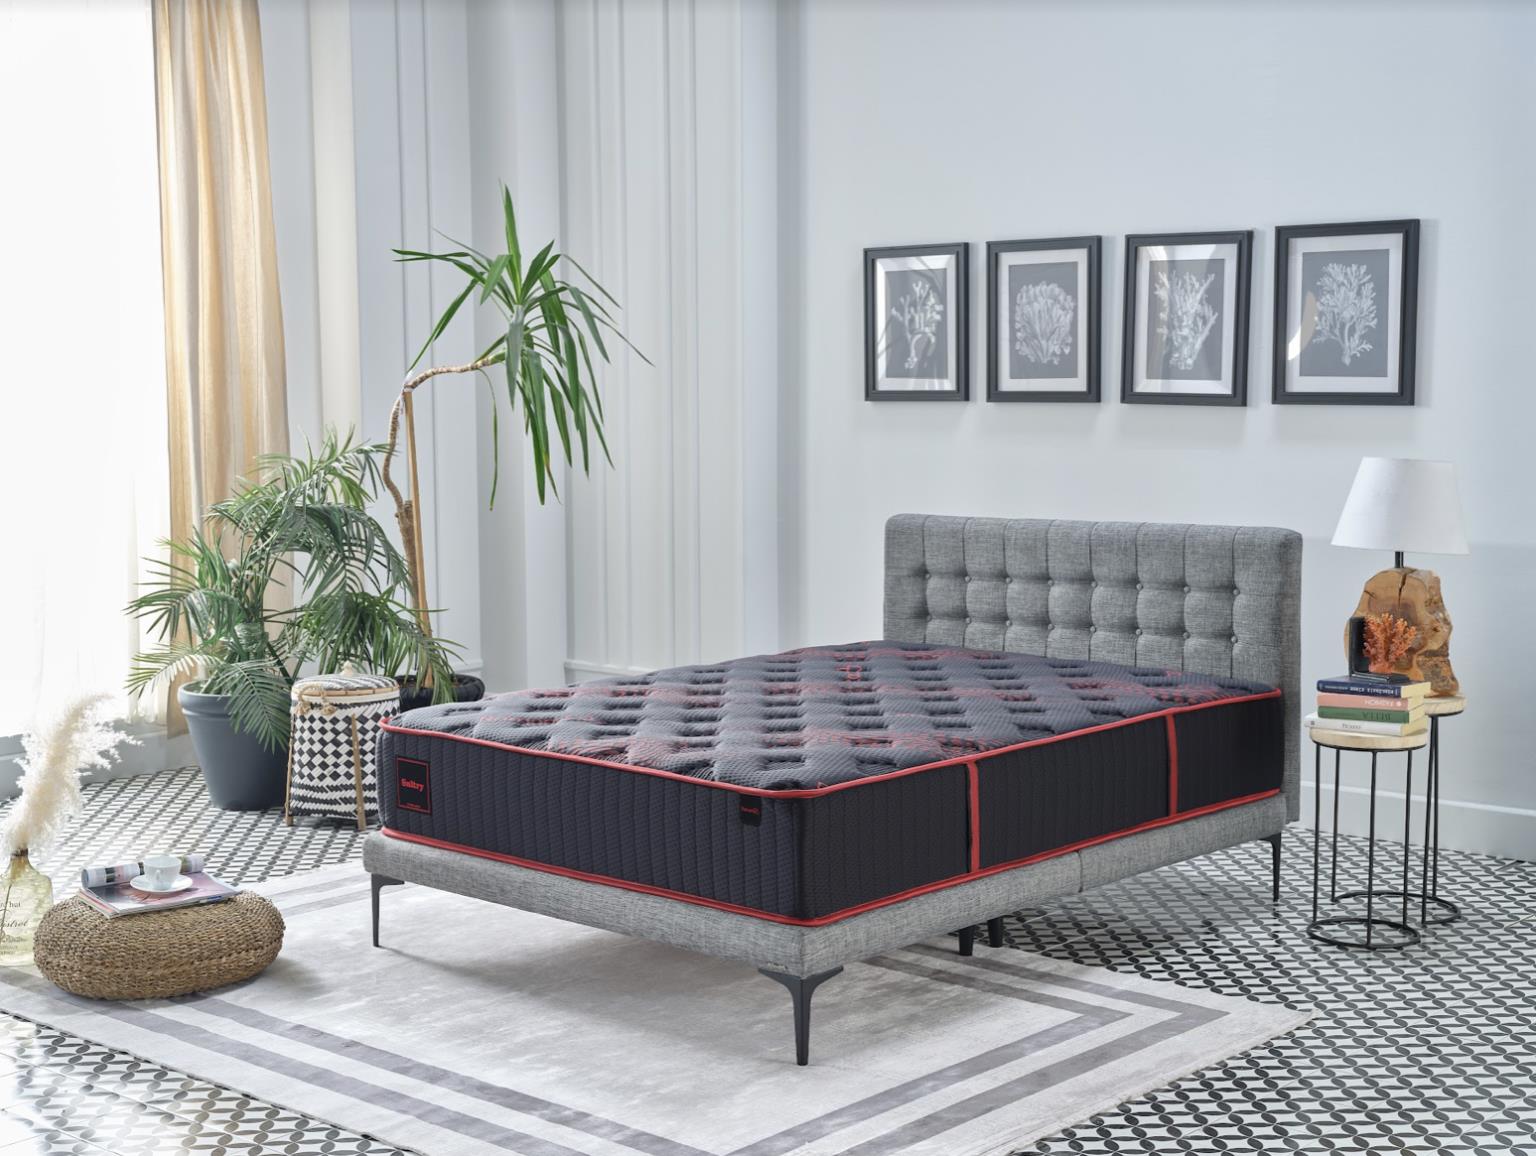 Sultry Romance Mattress - Home Store Furniture